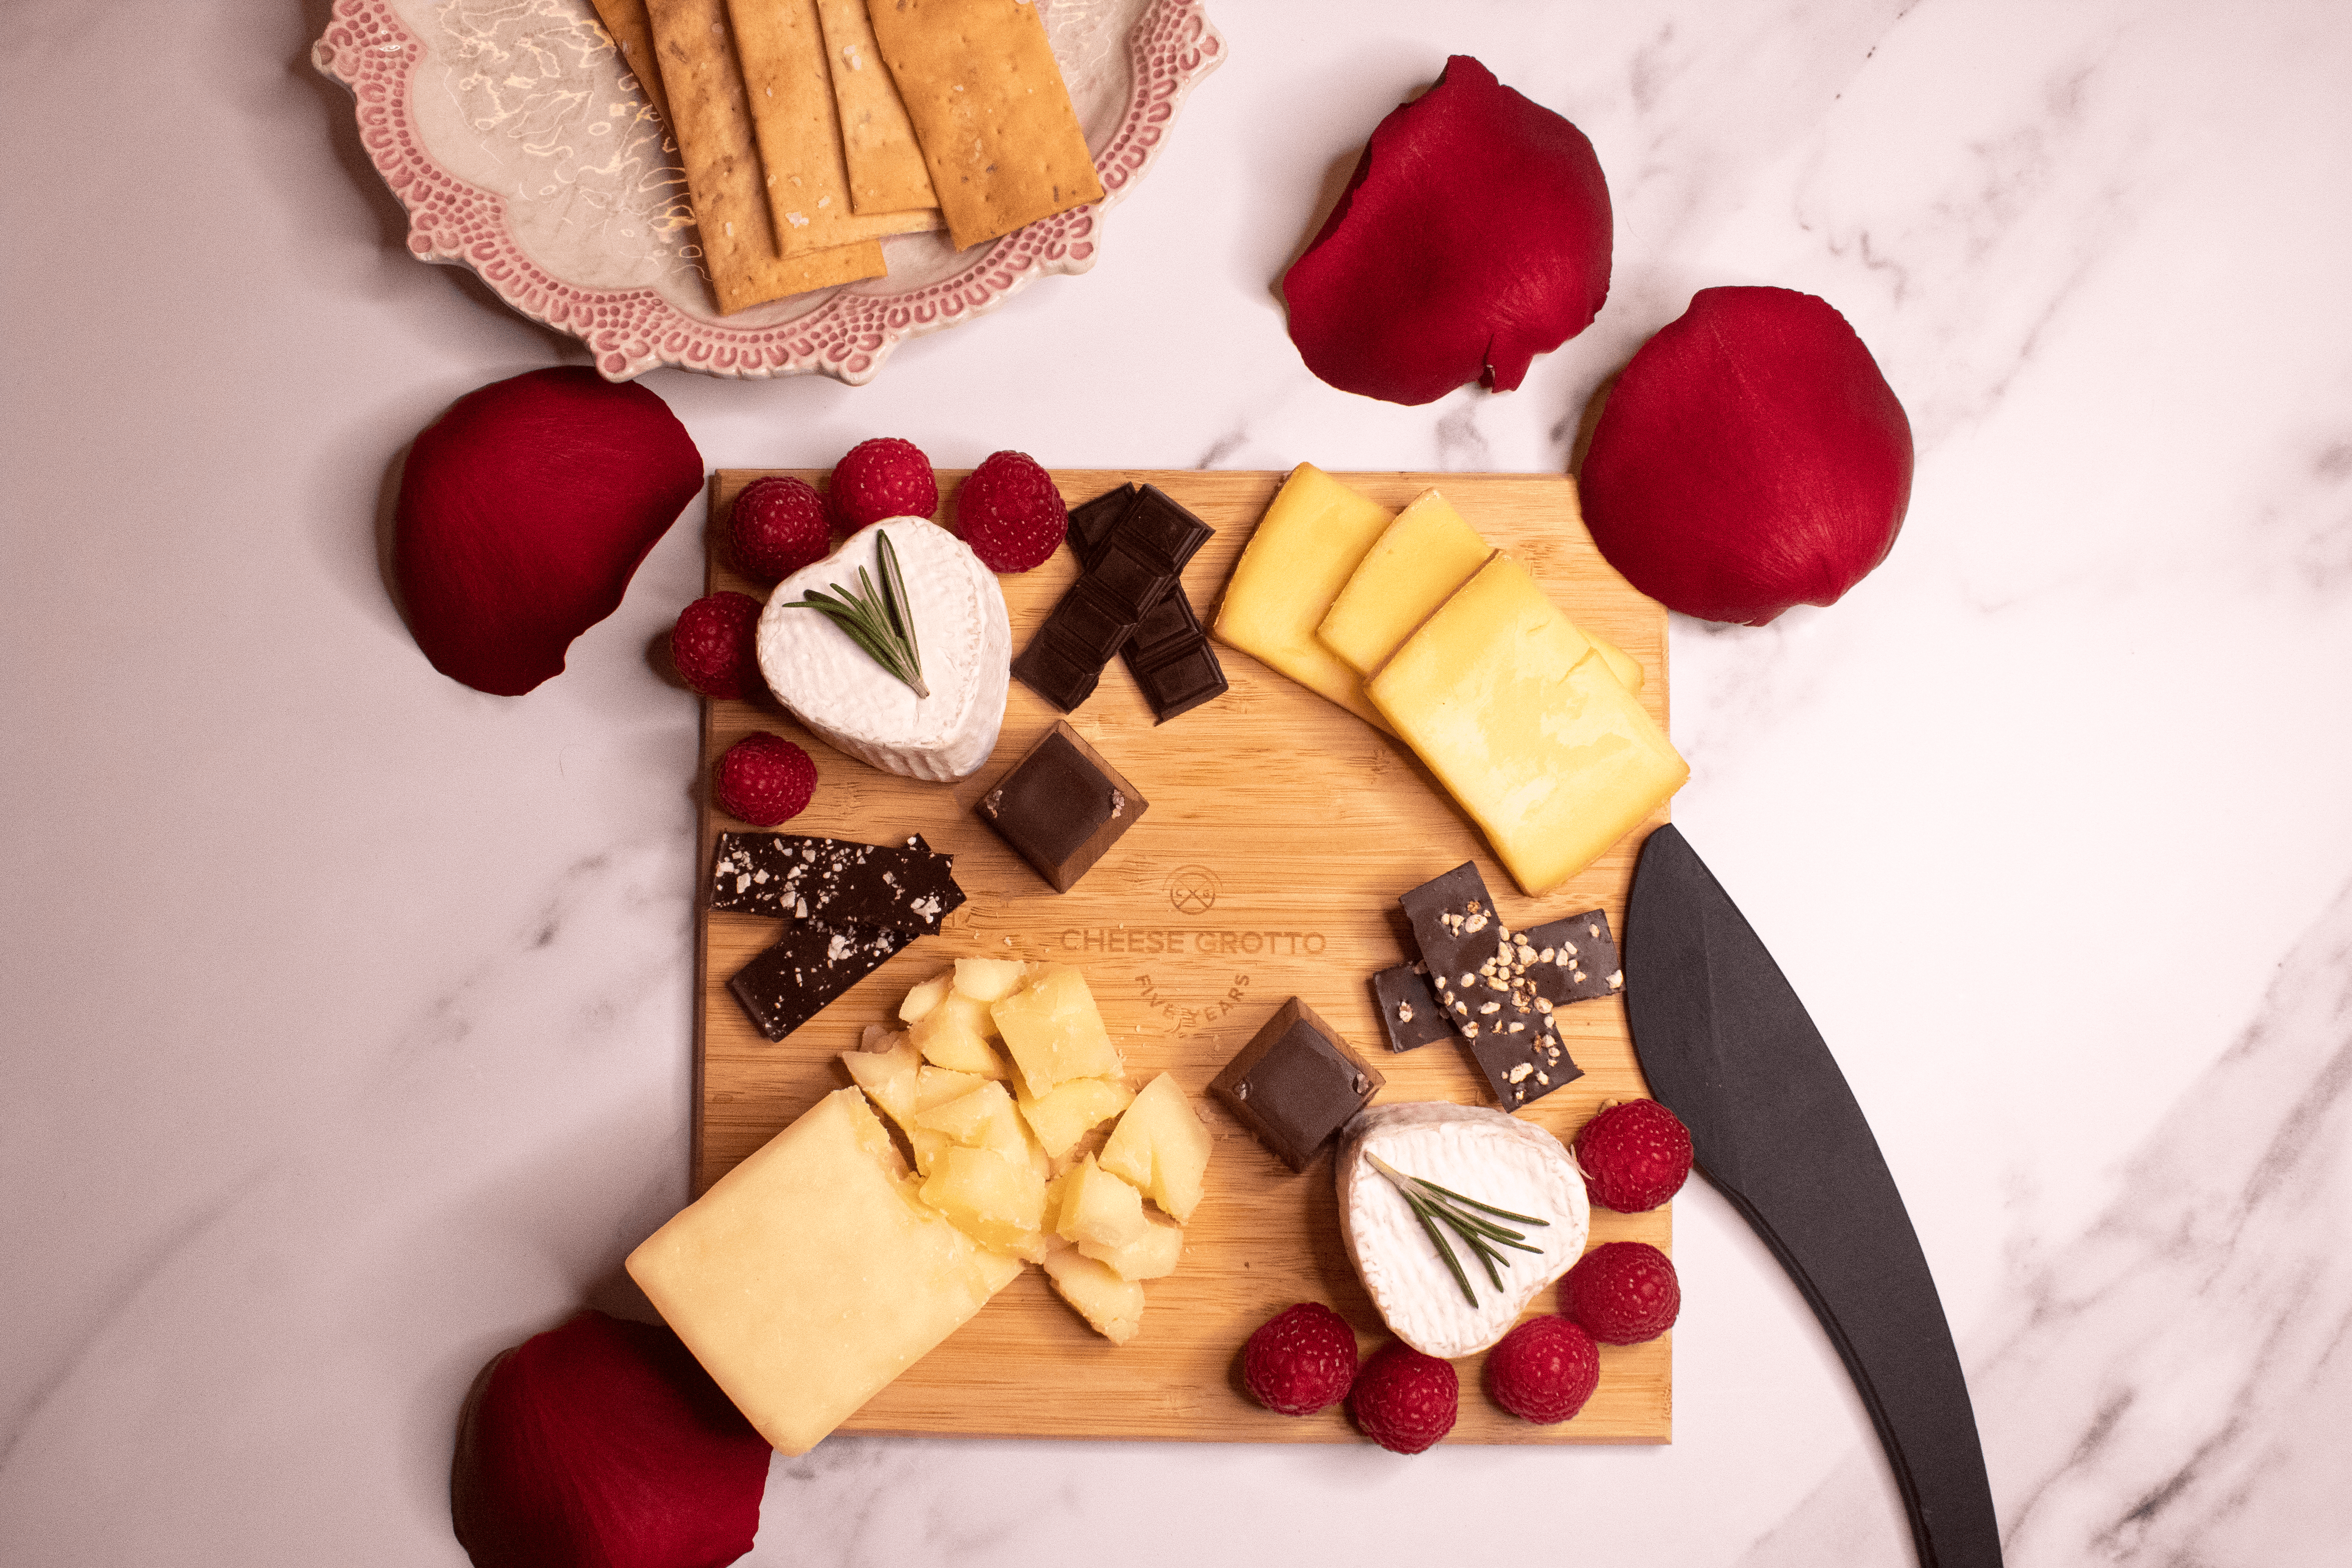 Valentine's Day Cheese and Chocolate Gifta – Cheese Grotto